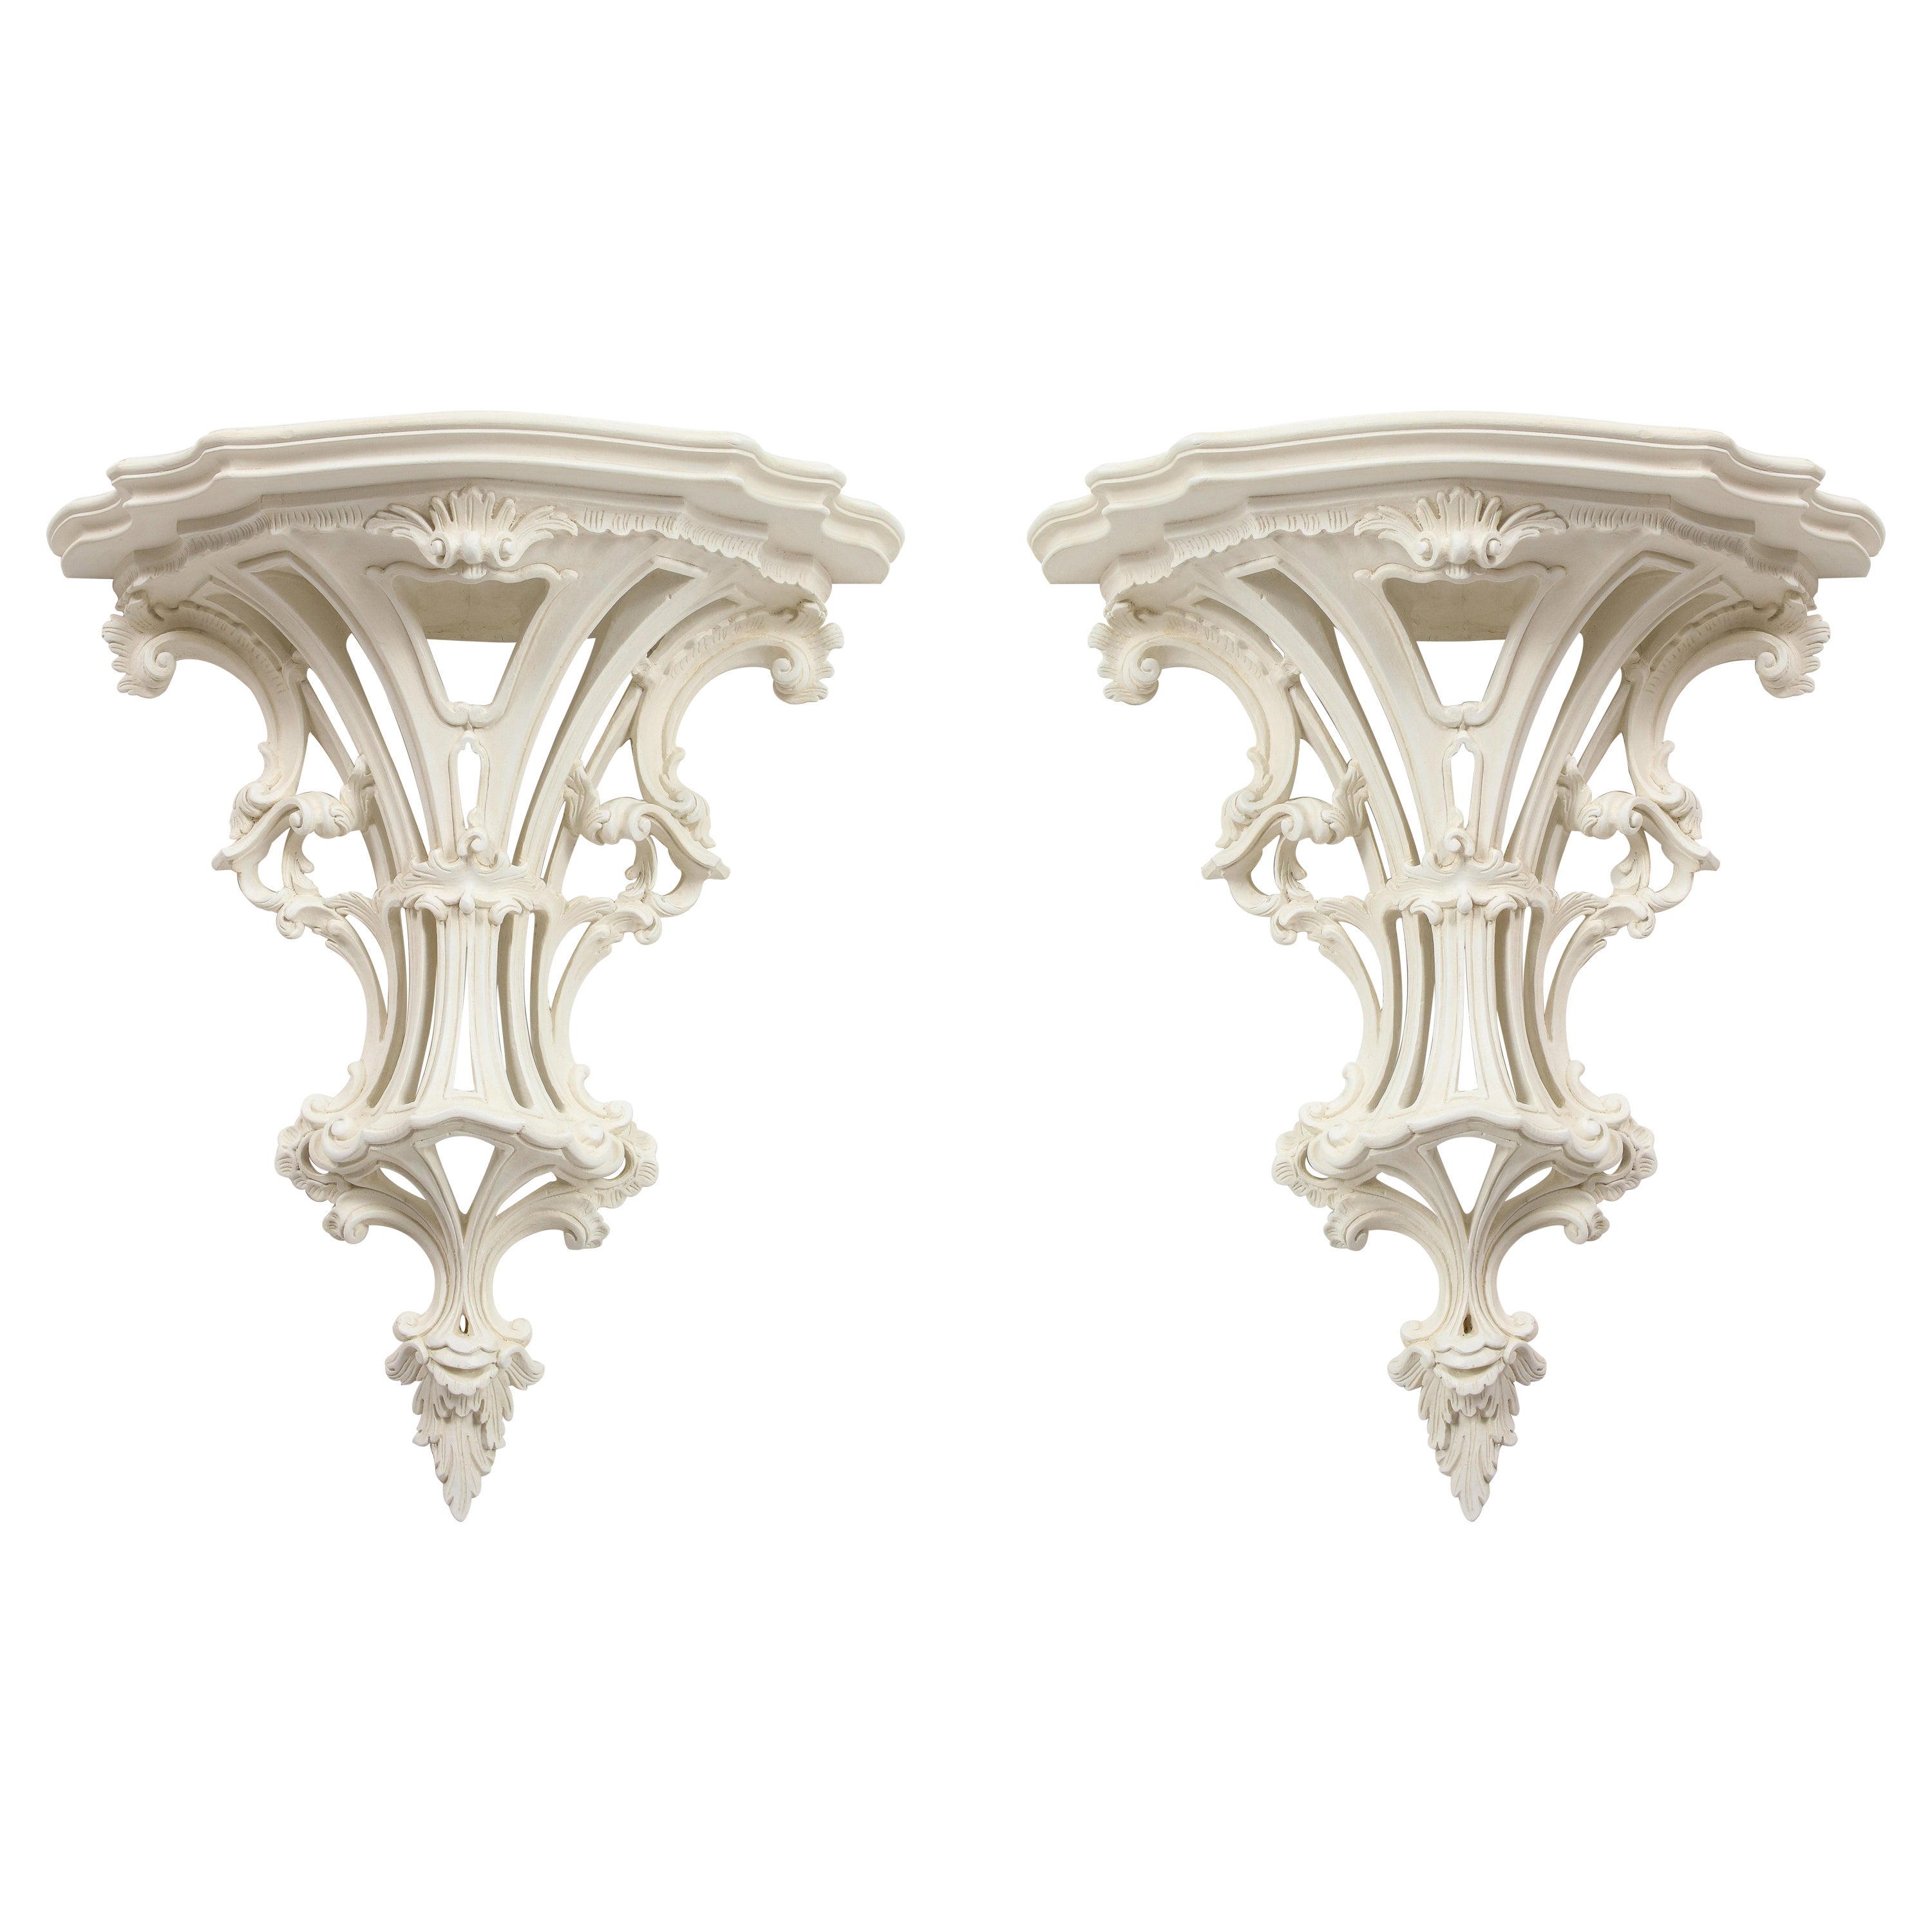 Pair of Large White-Gessoed Louis XV Style Wall Brackets